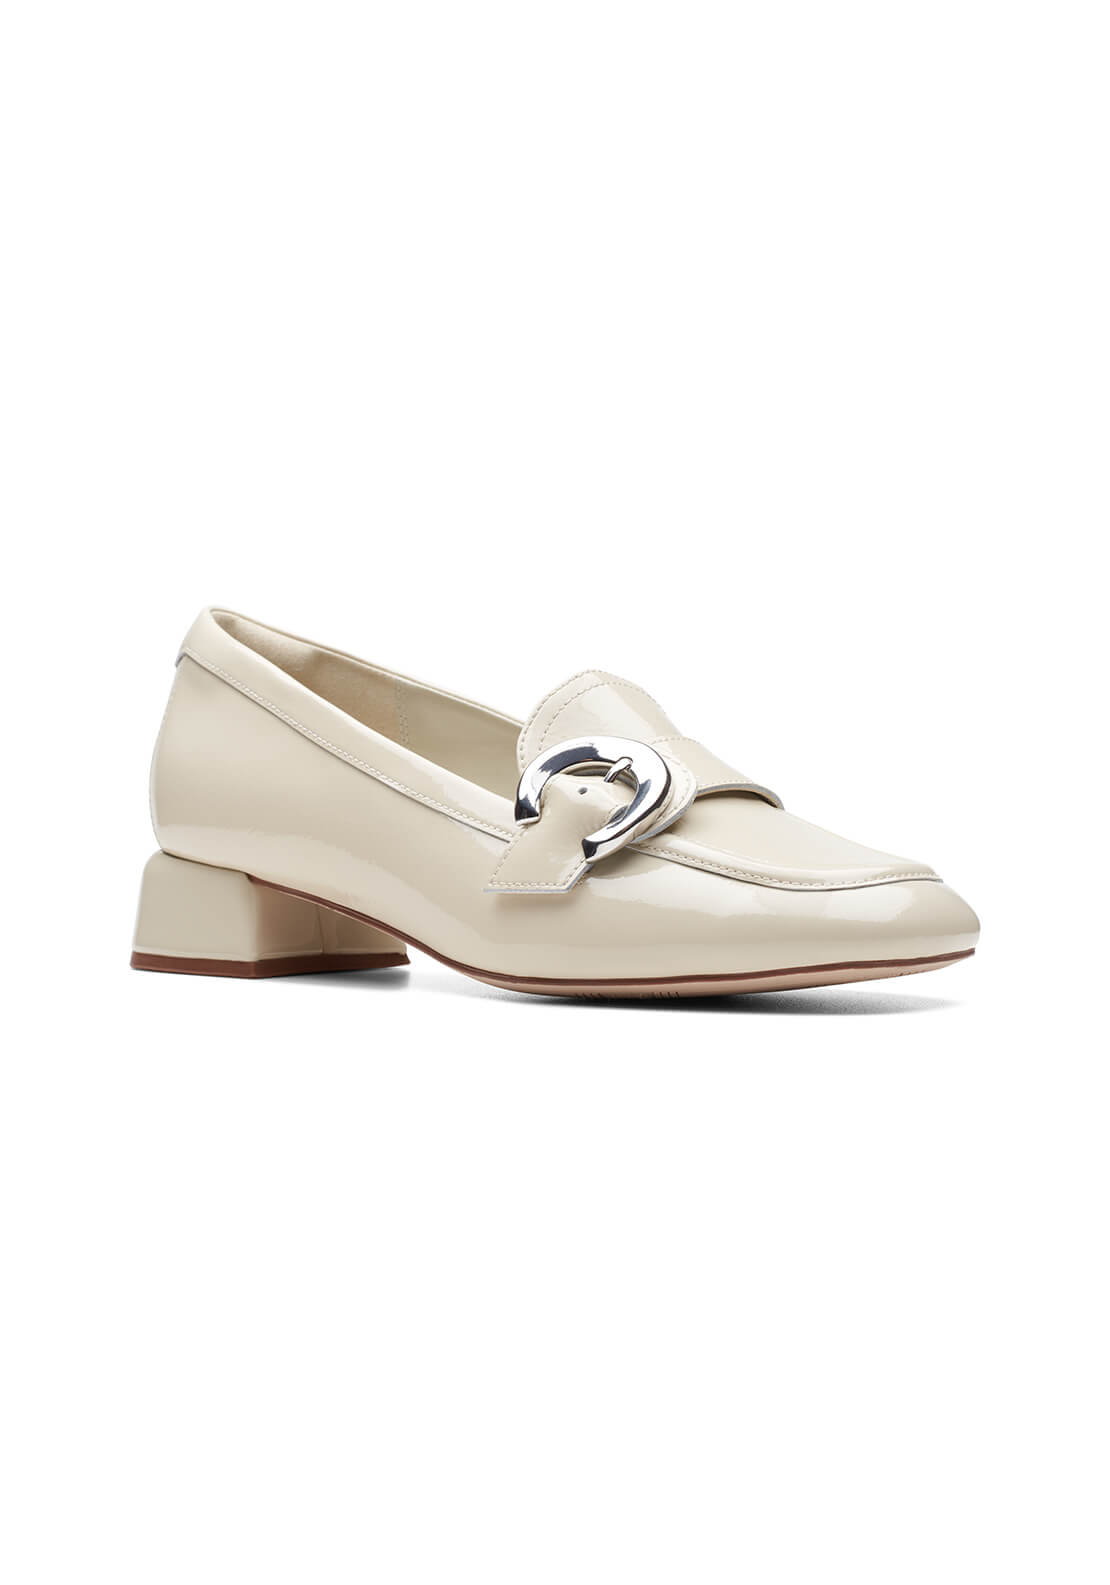 Clarks Daiss30 Trim Heeled Loafer - Ivory 4 Shaws Department Stores